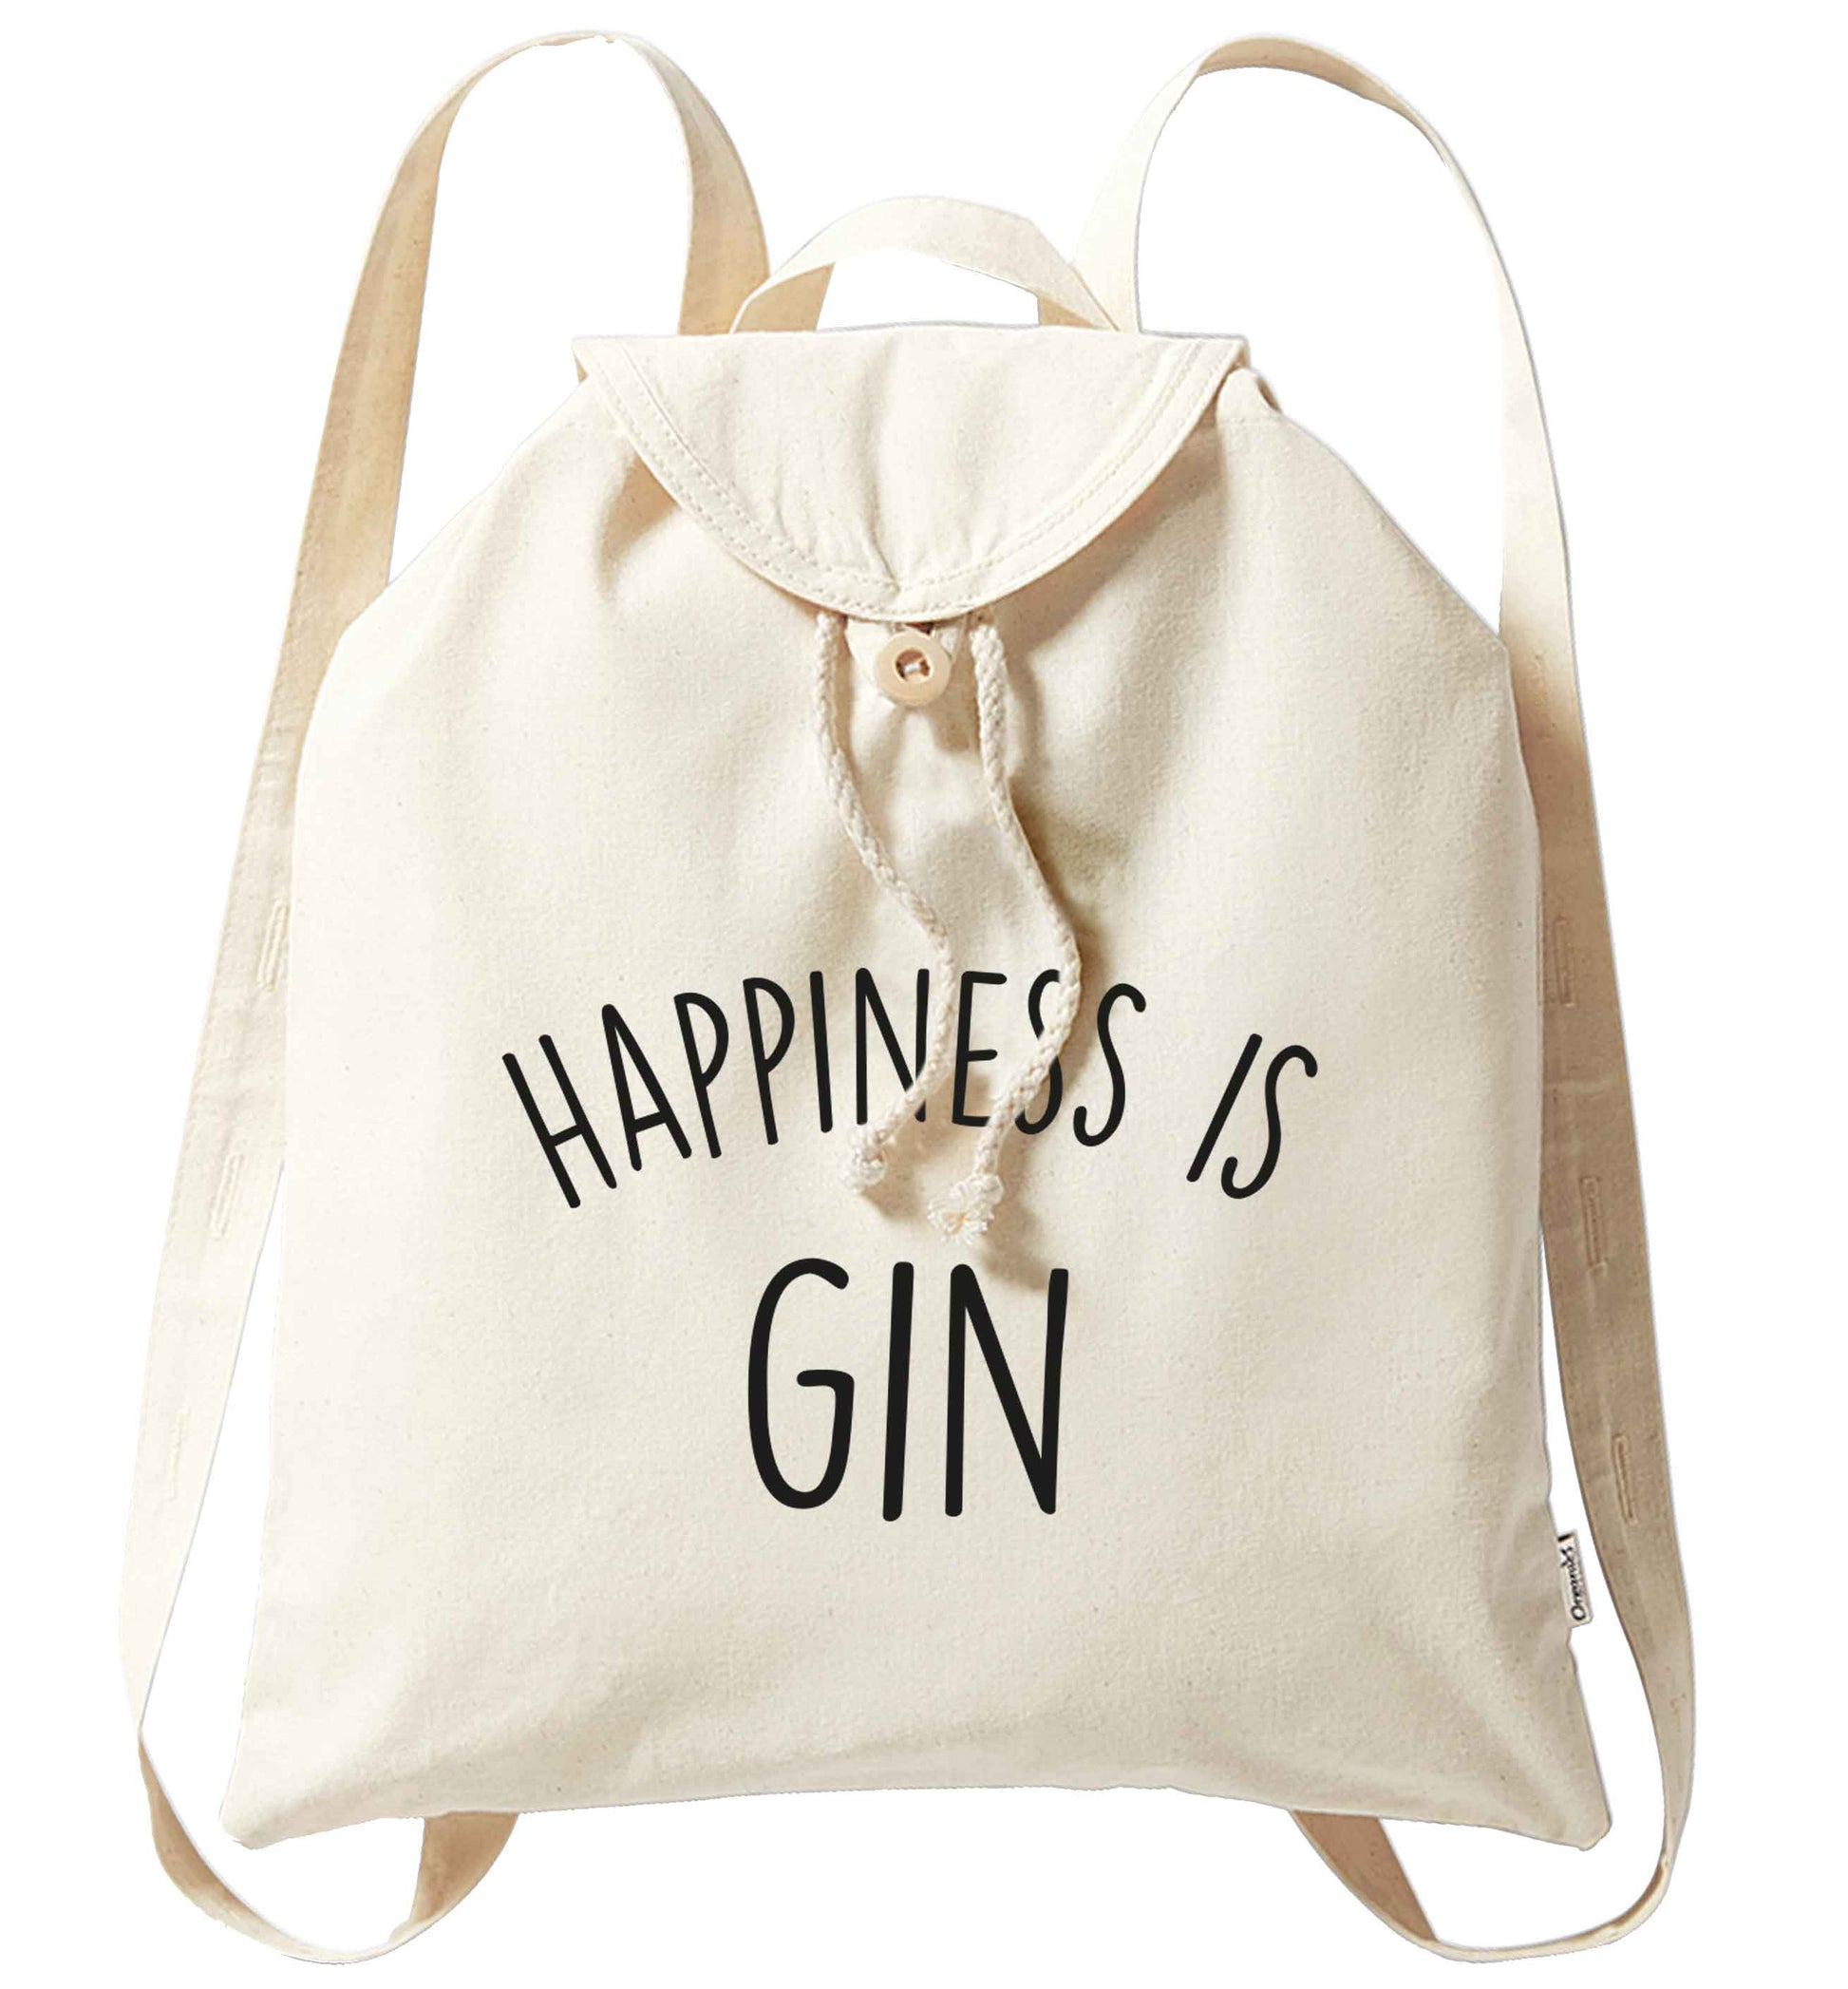 Happiness is gin organic cotton backpack tote with wooden buttons in natural